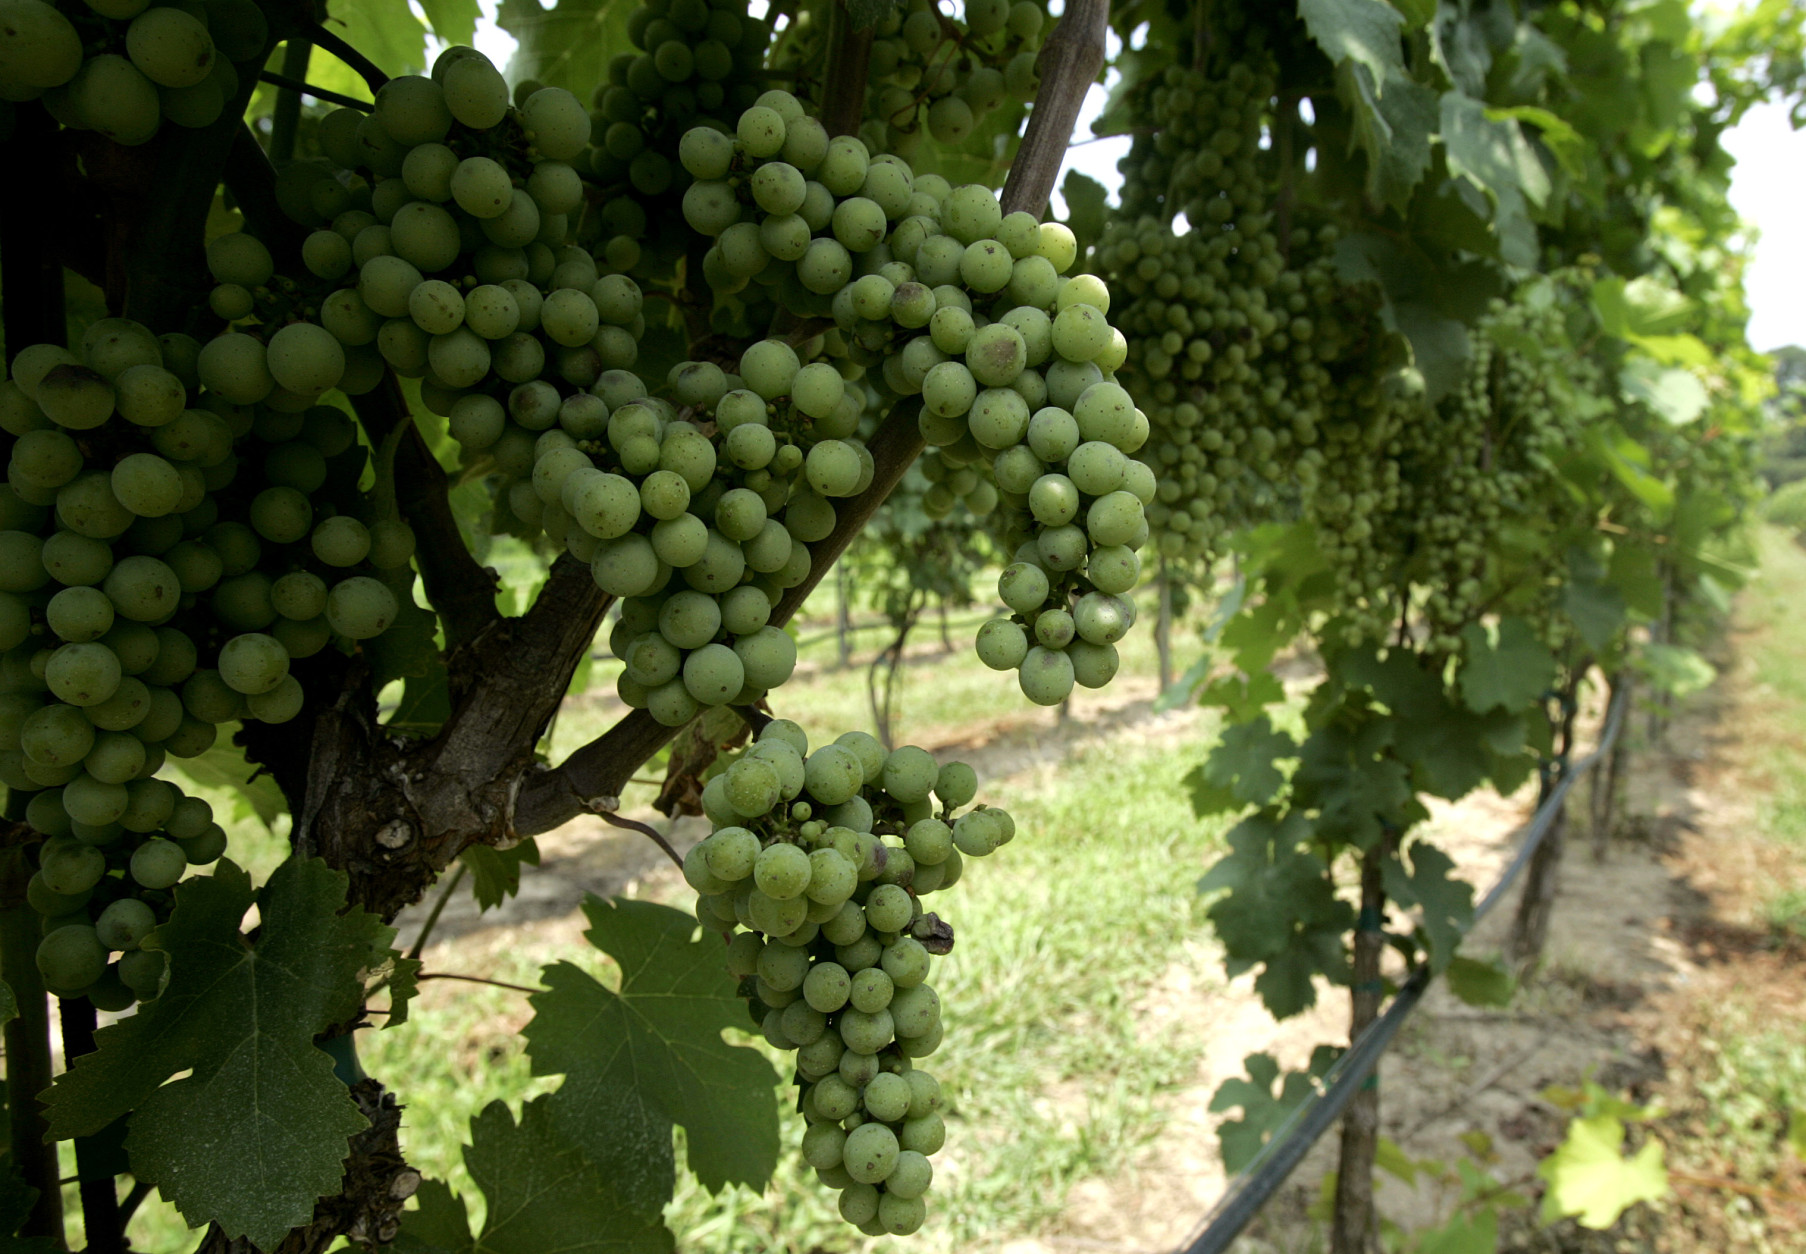 ** ADVANCE FOR MONDAY JULY 31 ** Grapes are seen growing at the Sugarloaf Mountain Vineyard in  Dickerson, Md., Wednesday, July 26, 2006. Sugarloaf Mountain Vineyard, owned by four family members, uncorked its first bottles in May, pouring more product into a state market made friendlier to small vintners by the General Assembly. A new law permits boutique bottlers like Sugarloaf Mountain to act as their own distributors, a change the state wine industry considers a small but significant chip in Maryland's barriers to free-flowing sales of alcoholic drinks. (AP Photo/Chris Gardner)